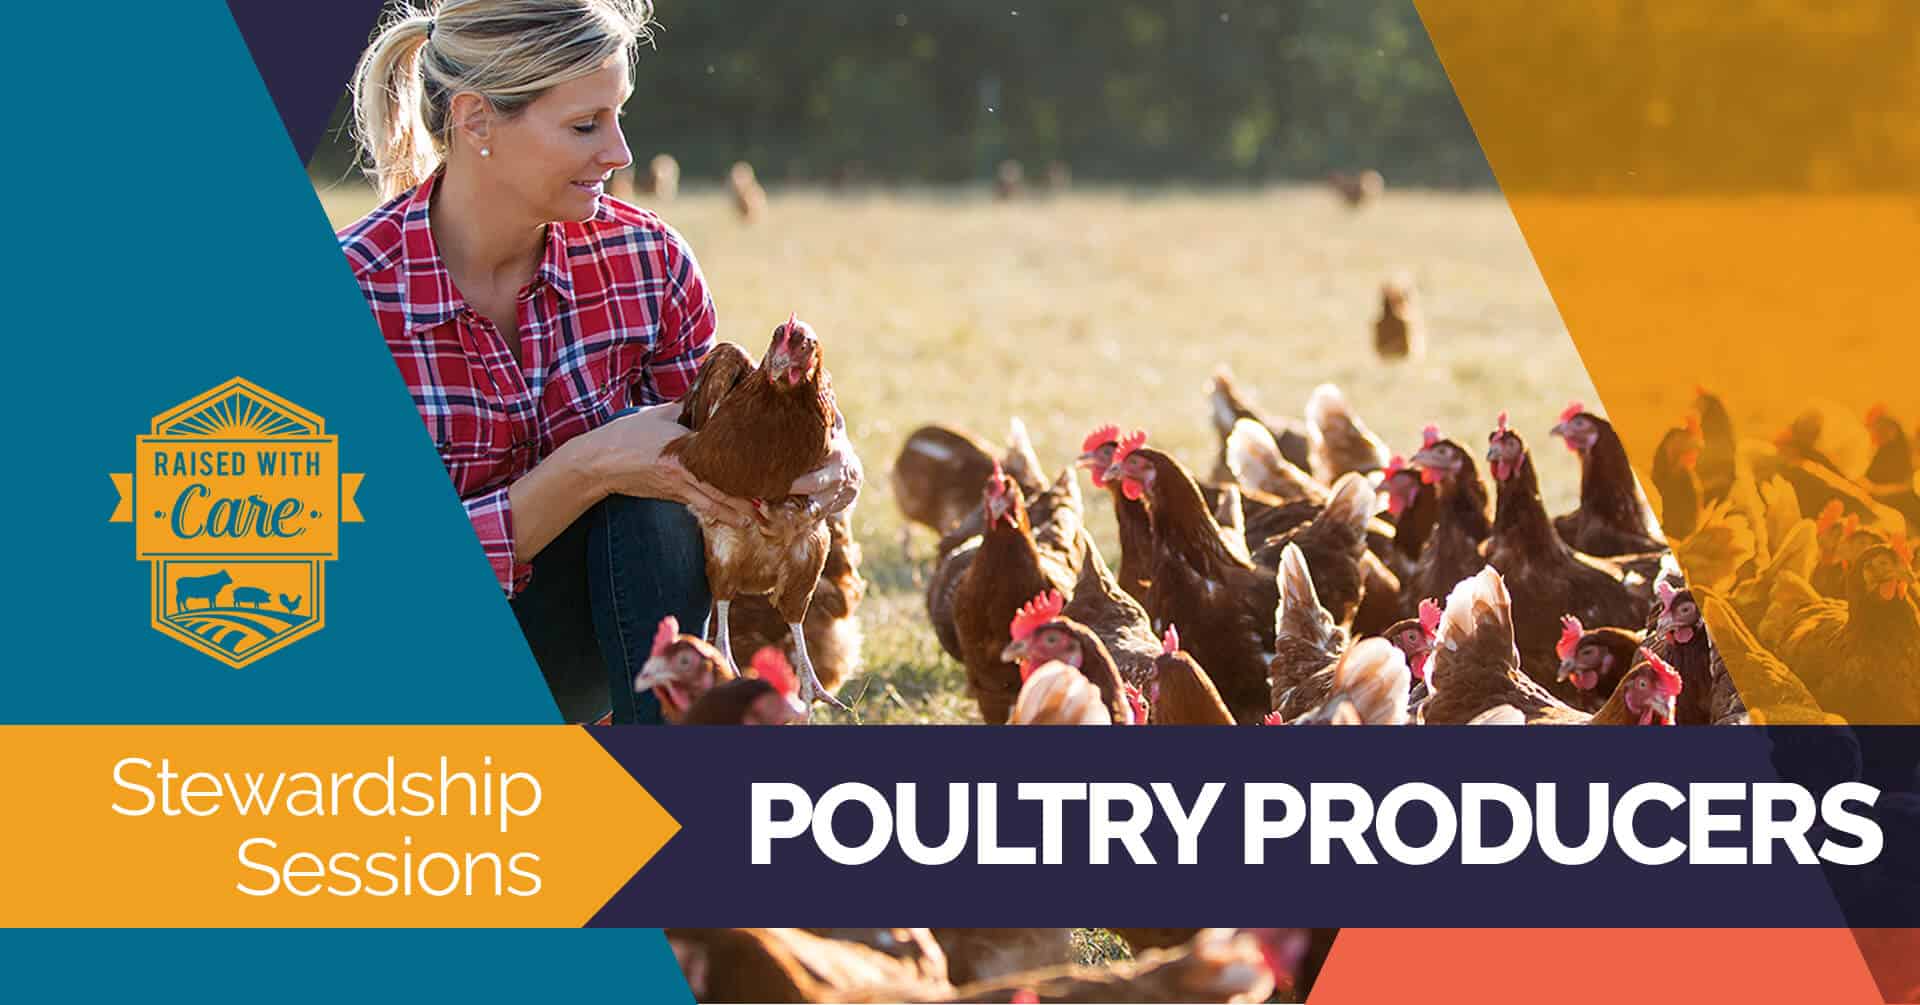 Raised With Care: Stewardship Sessions Poultry Producers